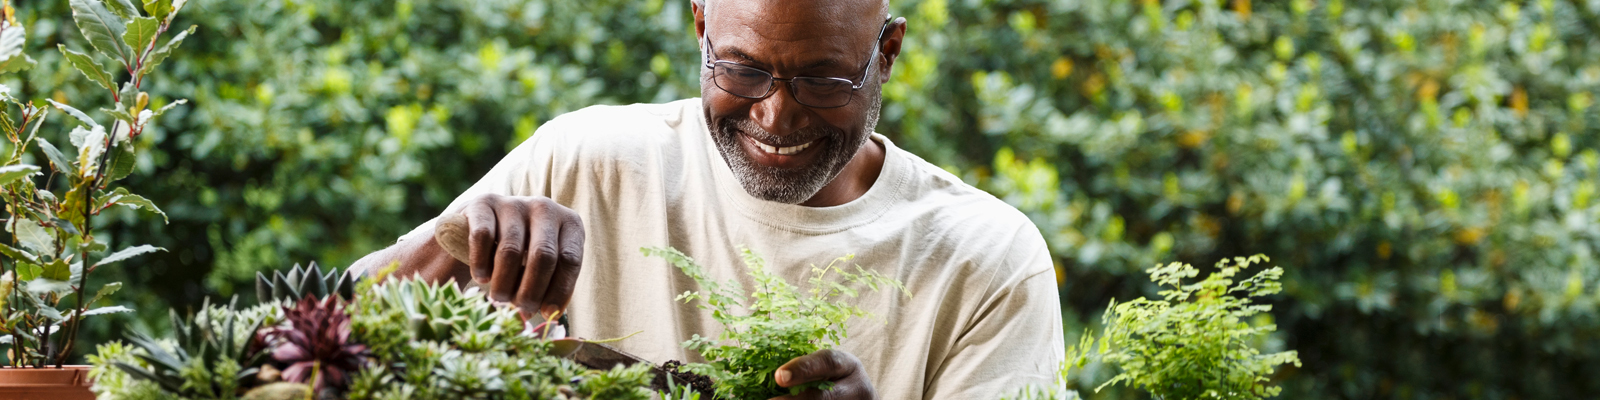 Banner image of a man tending to plants in his garden.